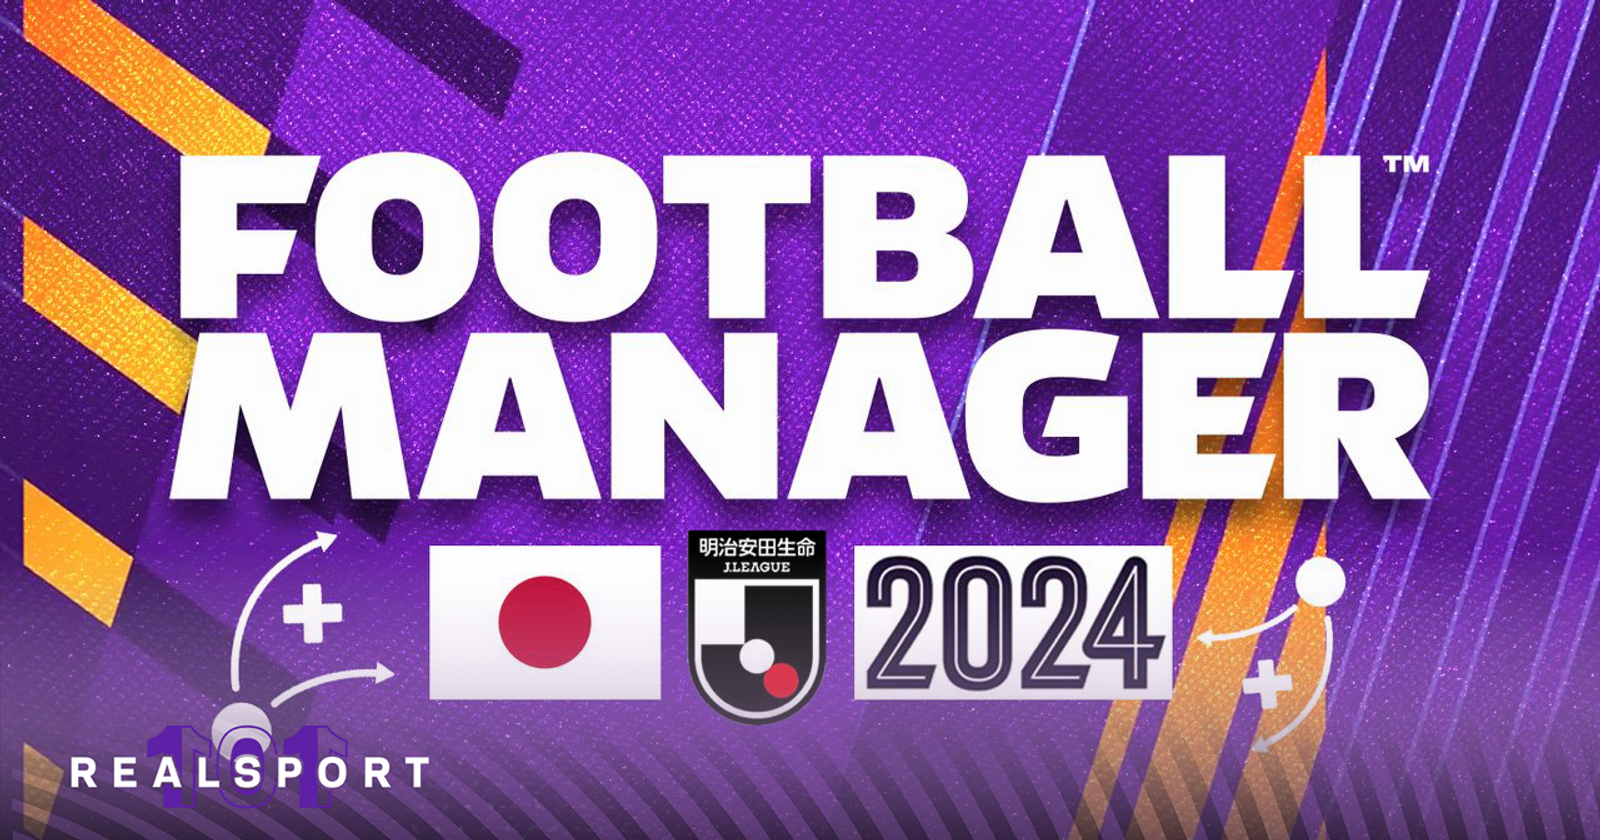 Football Manager 2024: J League is official!